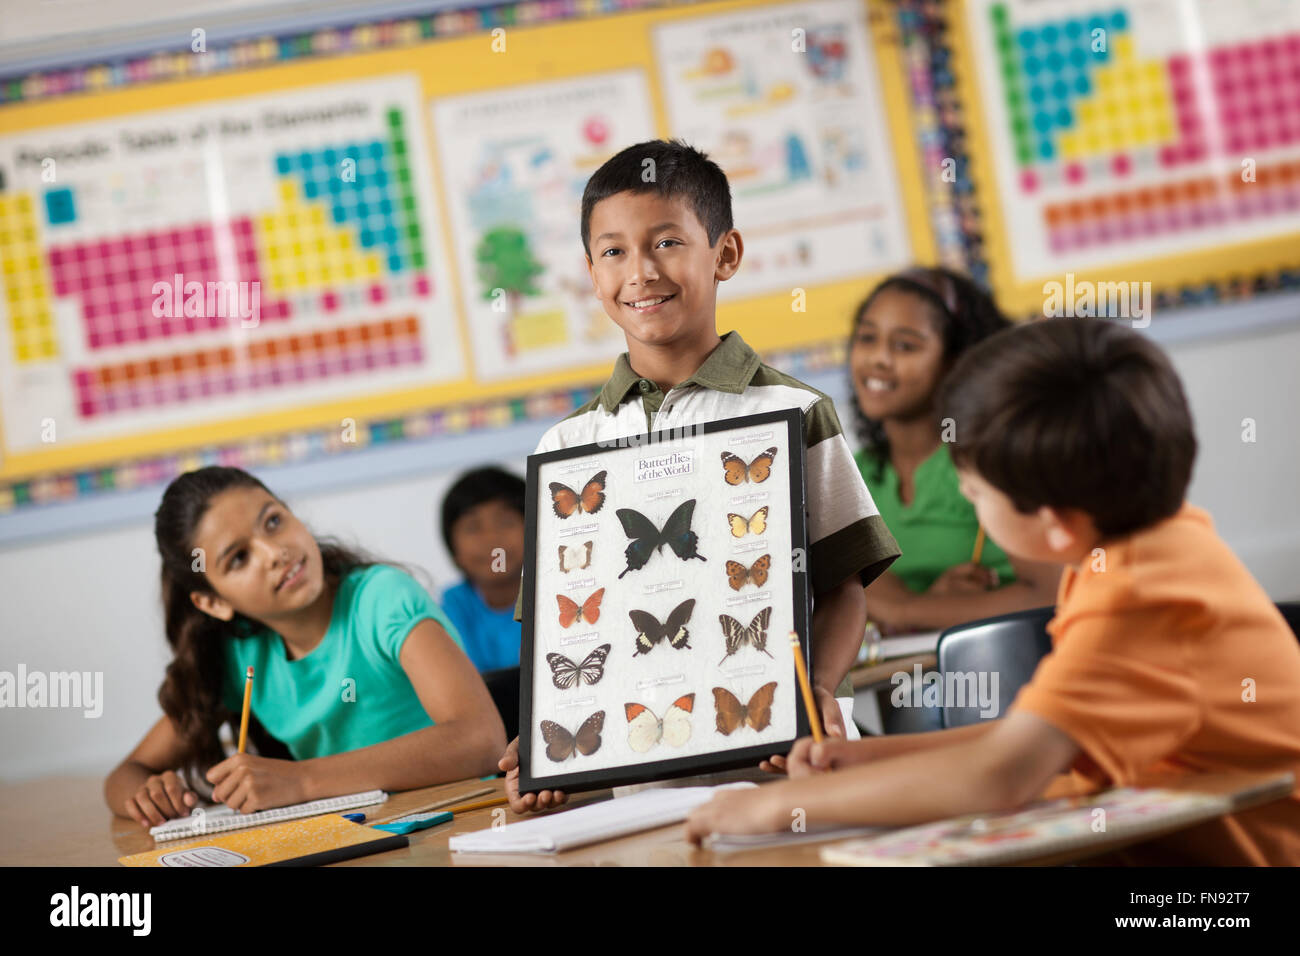 A boy standing in front of classmates, holding up a frame with butterfly specimens. Stock Photo